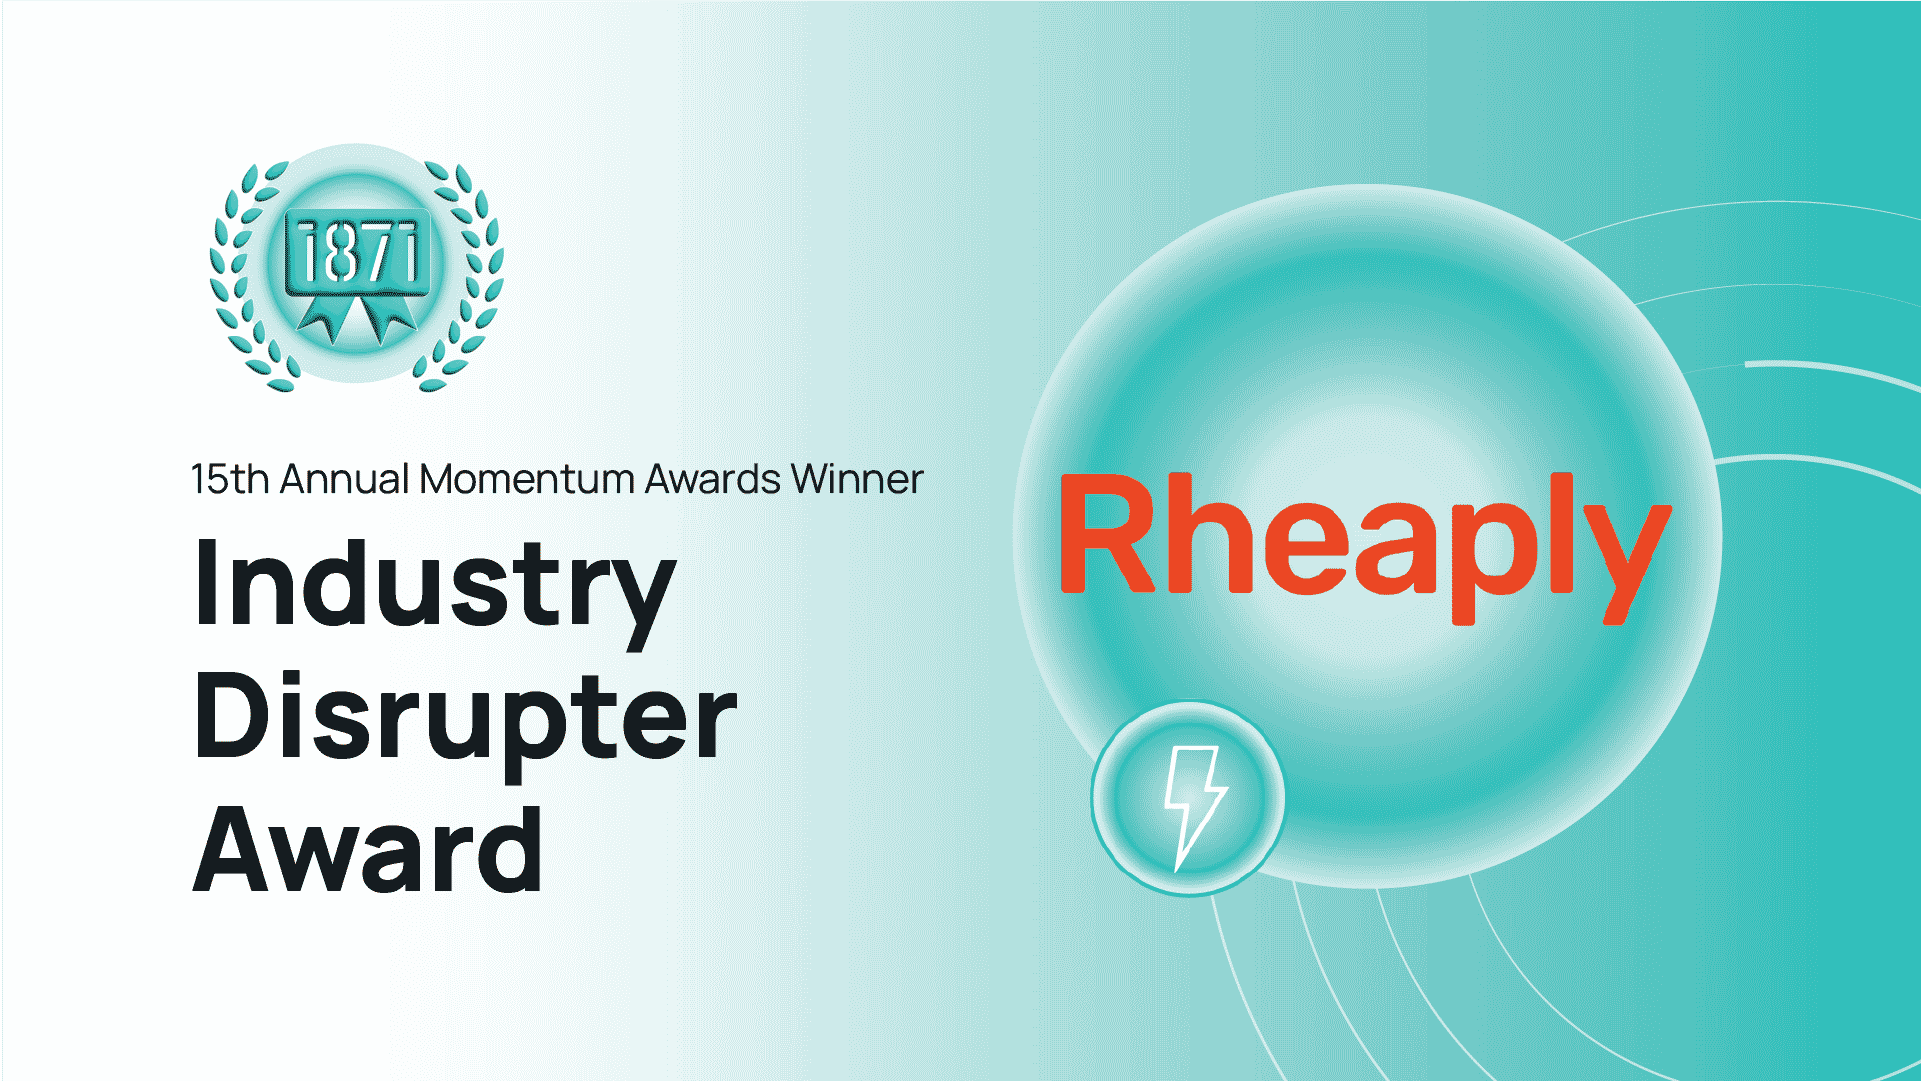 Rheaply named Industry Disruptor at 1871 Momentum Awards Rheaply